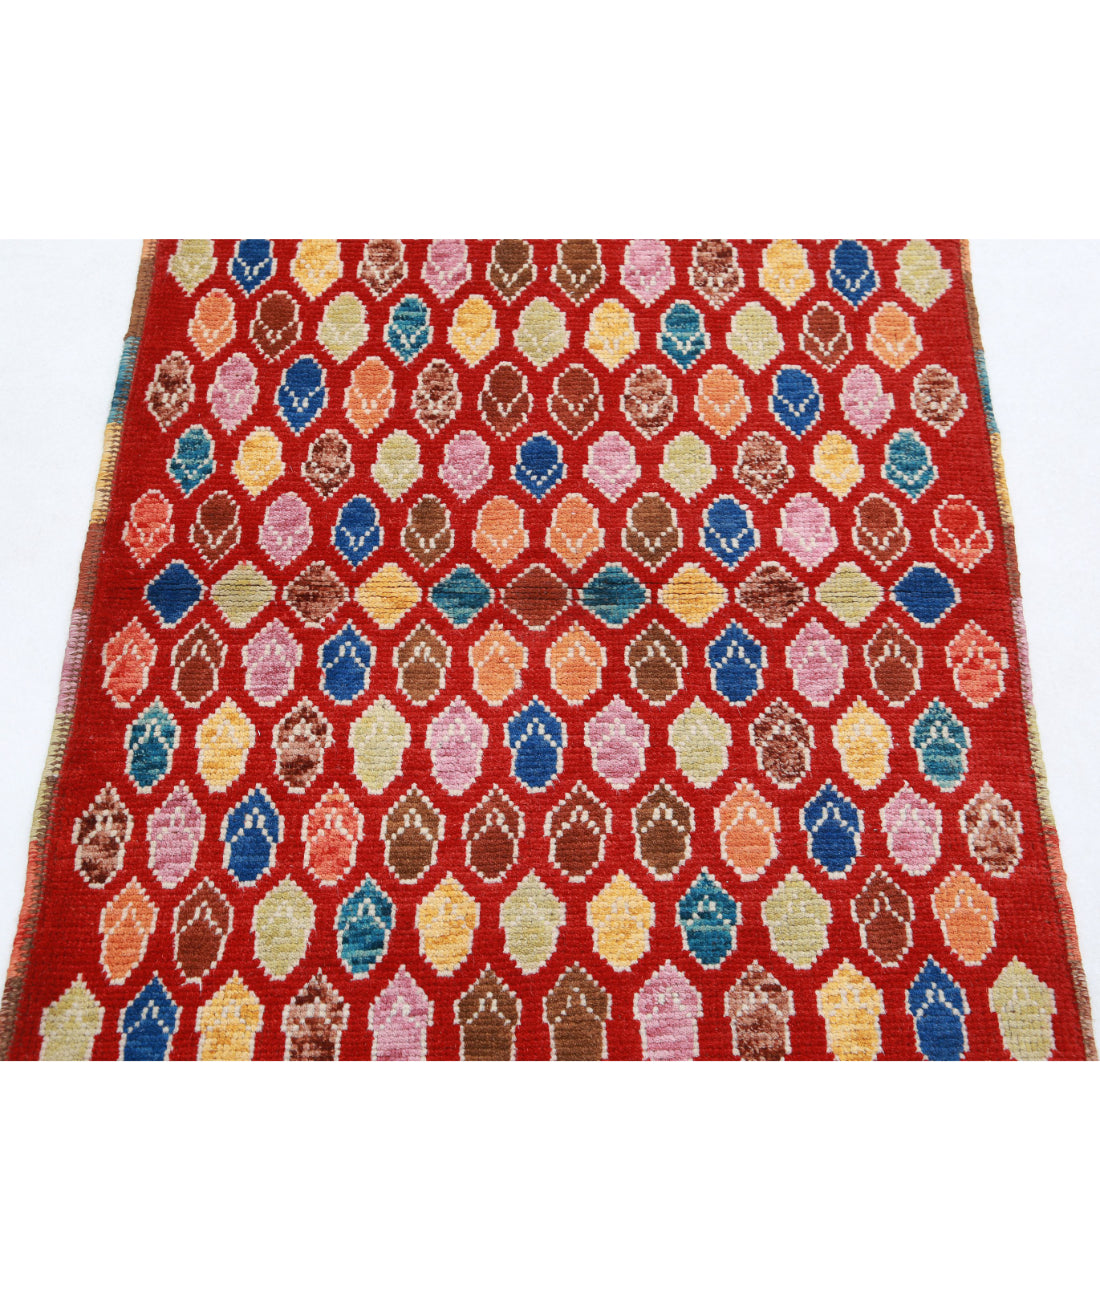 Revival 2'9'' X 4'0'' Hand-Knotted Wool Rug 2'9'' x 4'0'' (83 X 120) / Red / Multi